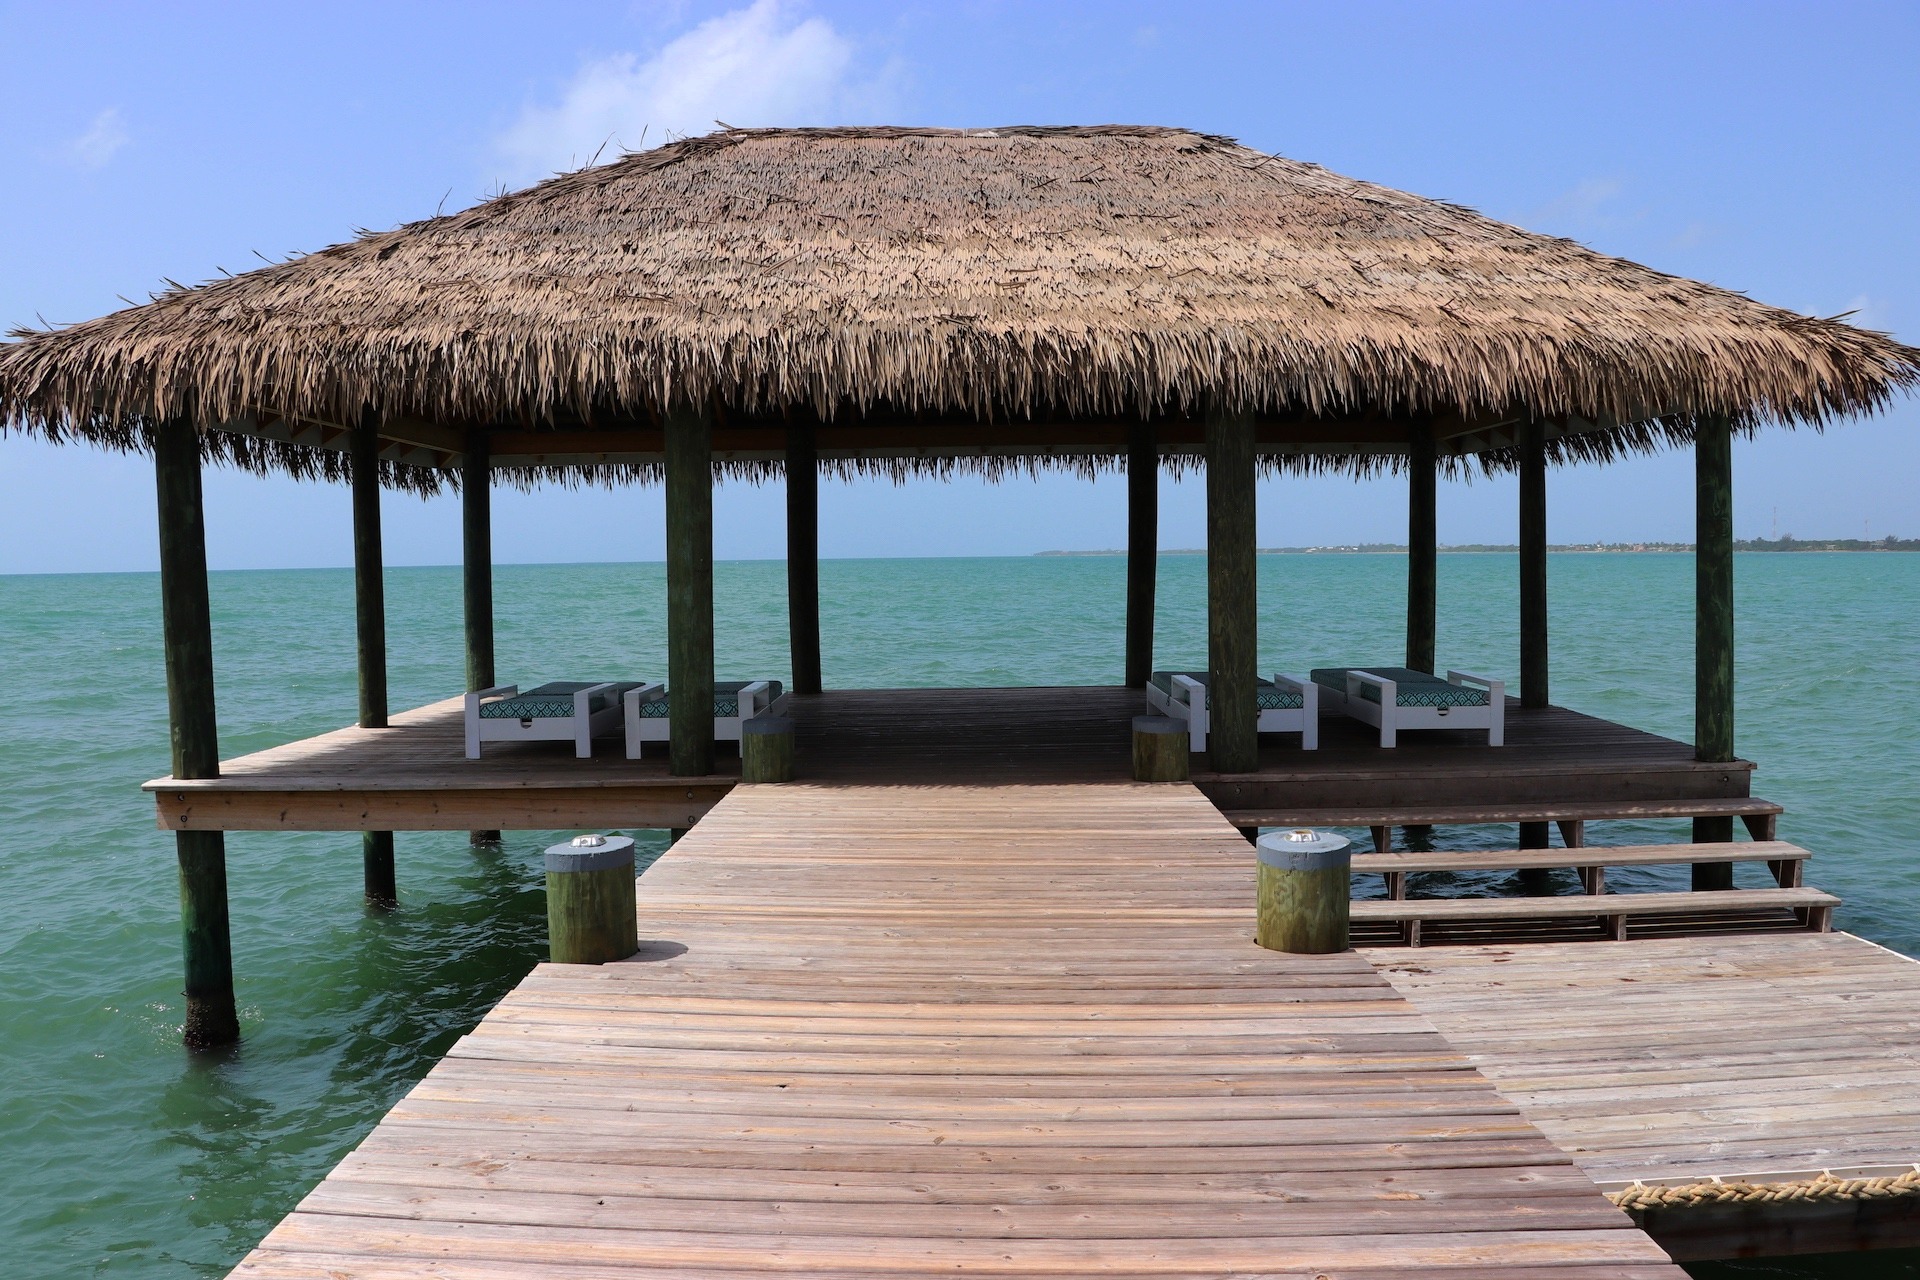 Visiting the Naia Resort & Spa located in Placencia, Belize | Trip to Belize - Inspire Travel Eat